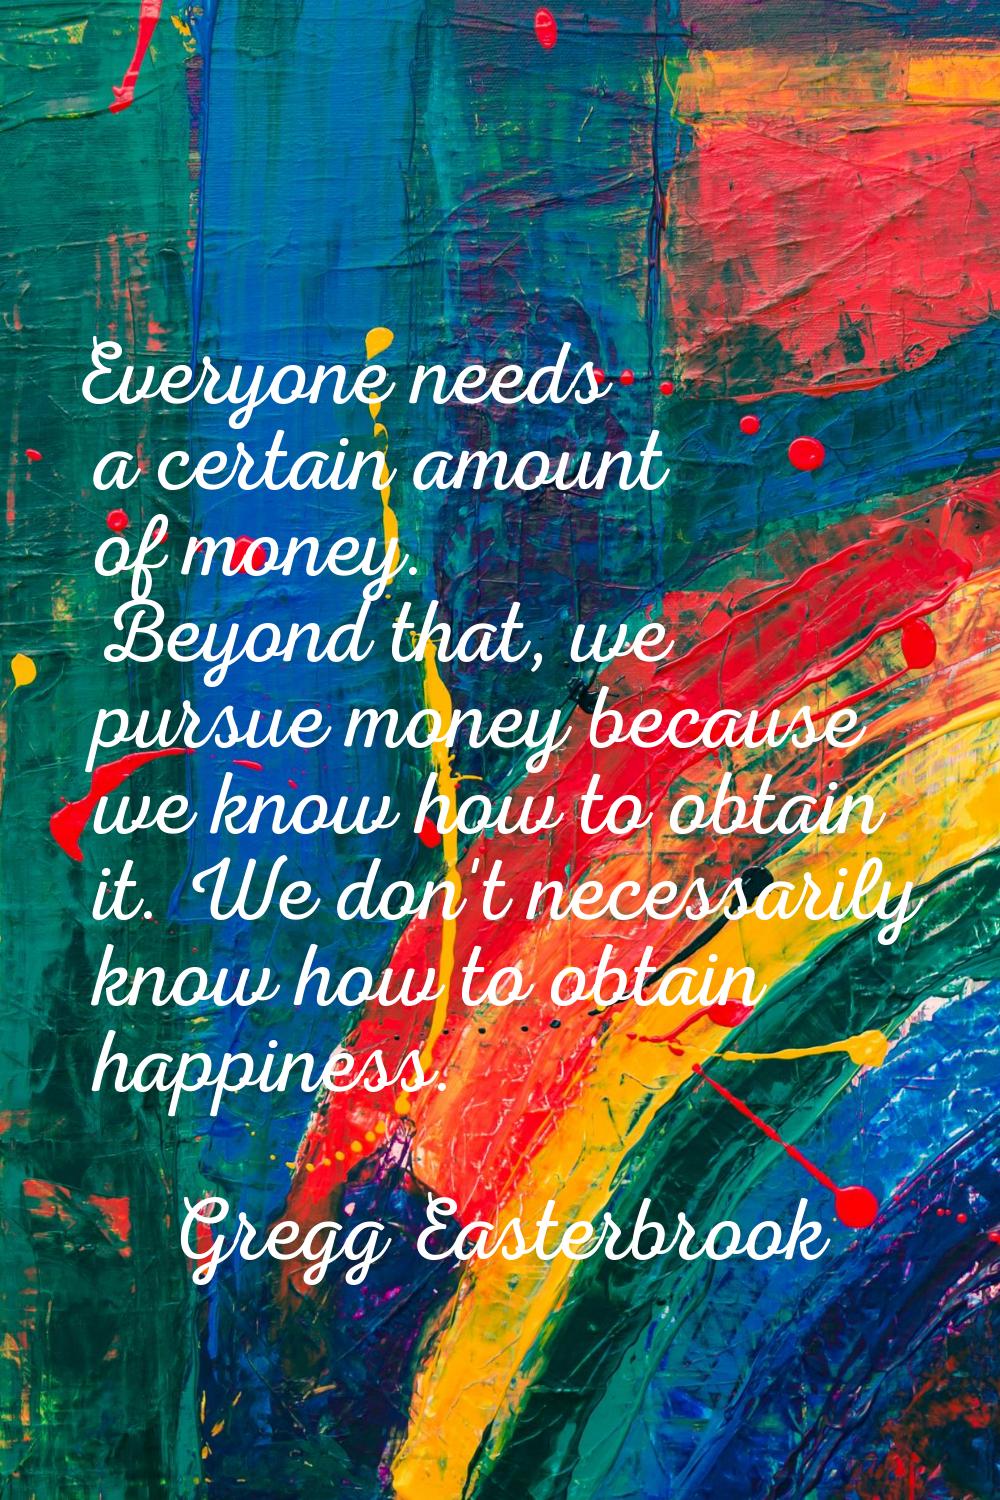 Everyone needs a certain amount of money. Beyond that, we pursue money because we know how to obtai